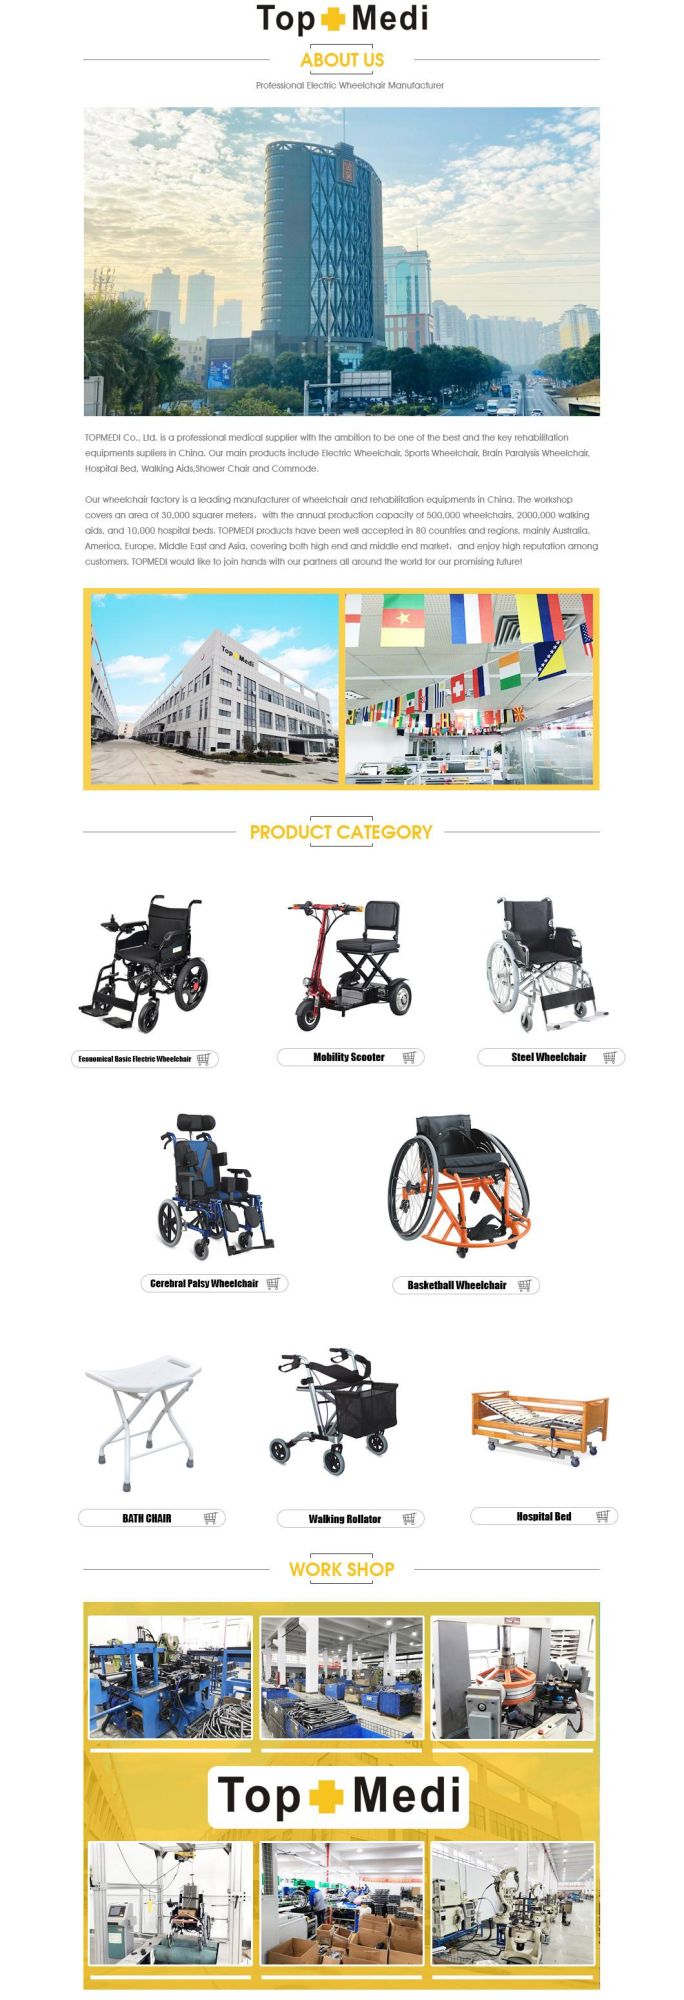 Long Lifespan High Quality 28kg Electric Folding Power Wheelchair with Lithium Battery